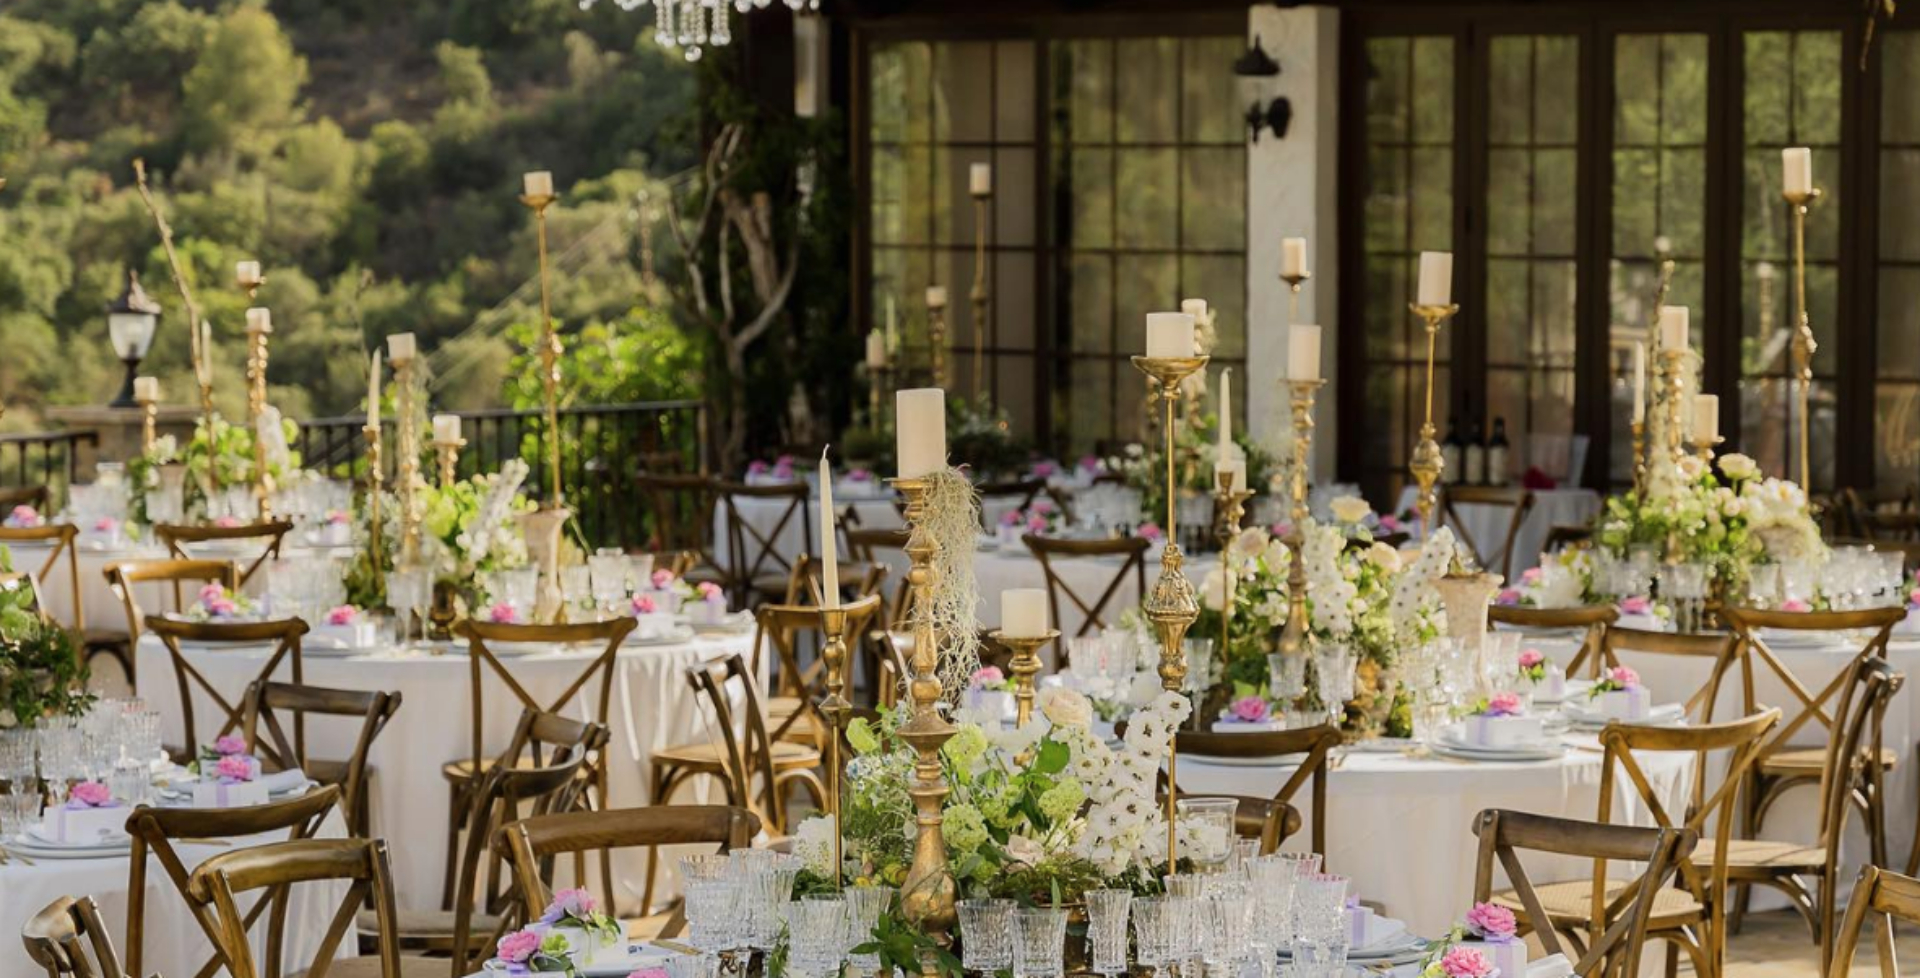 Casa de Events stunning styling of the venue